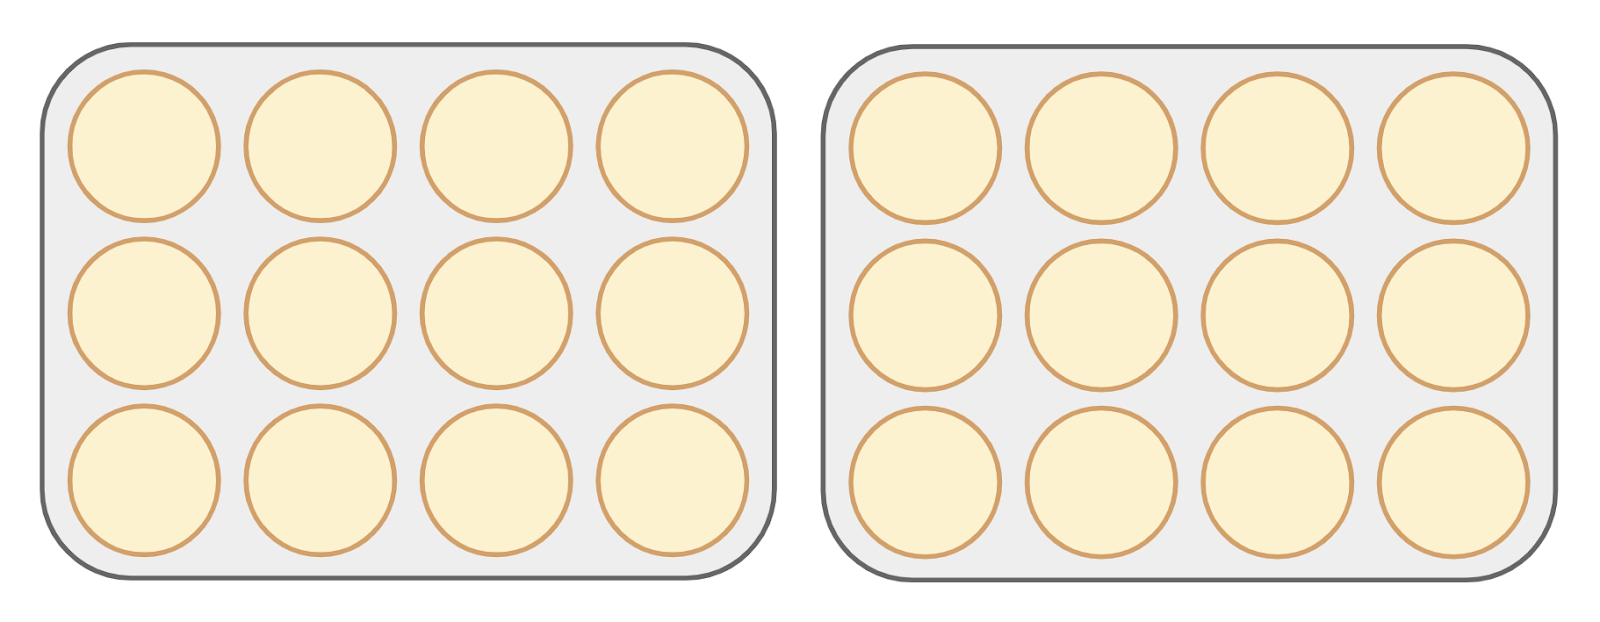 An overhead view of two trays, each containing 12 muffins in a 4 by 3 array.